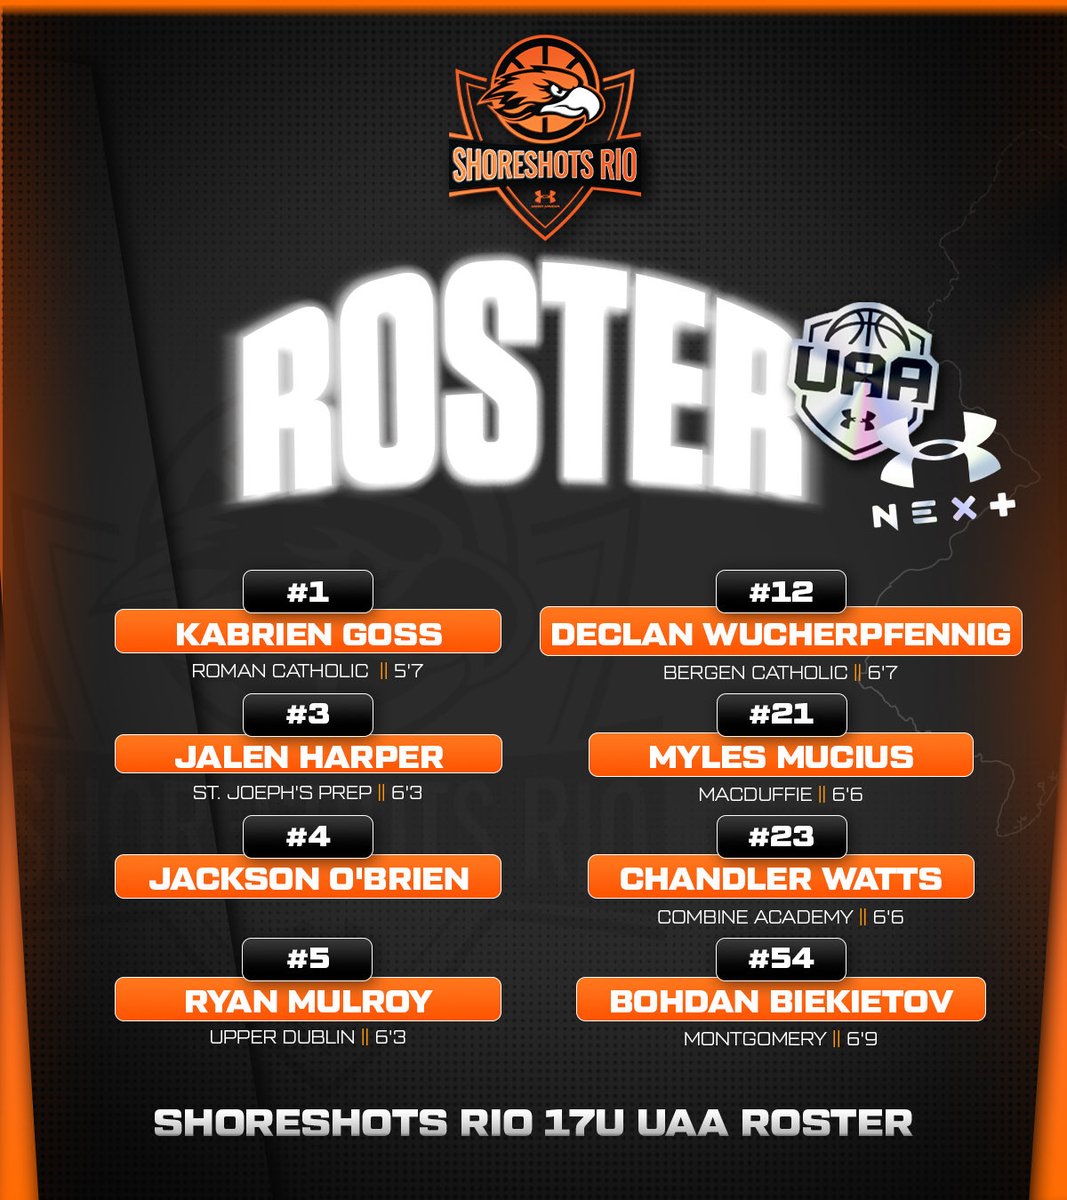 17’s UAA roster for this weekend.